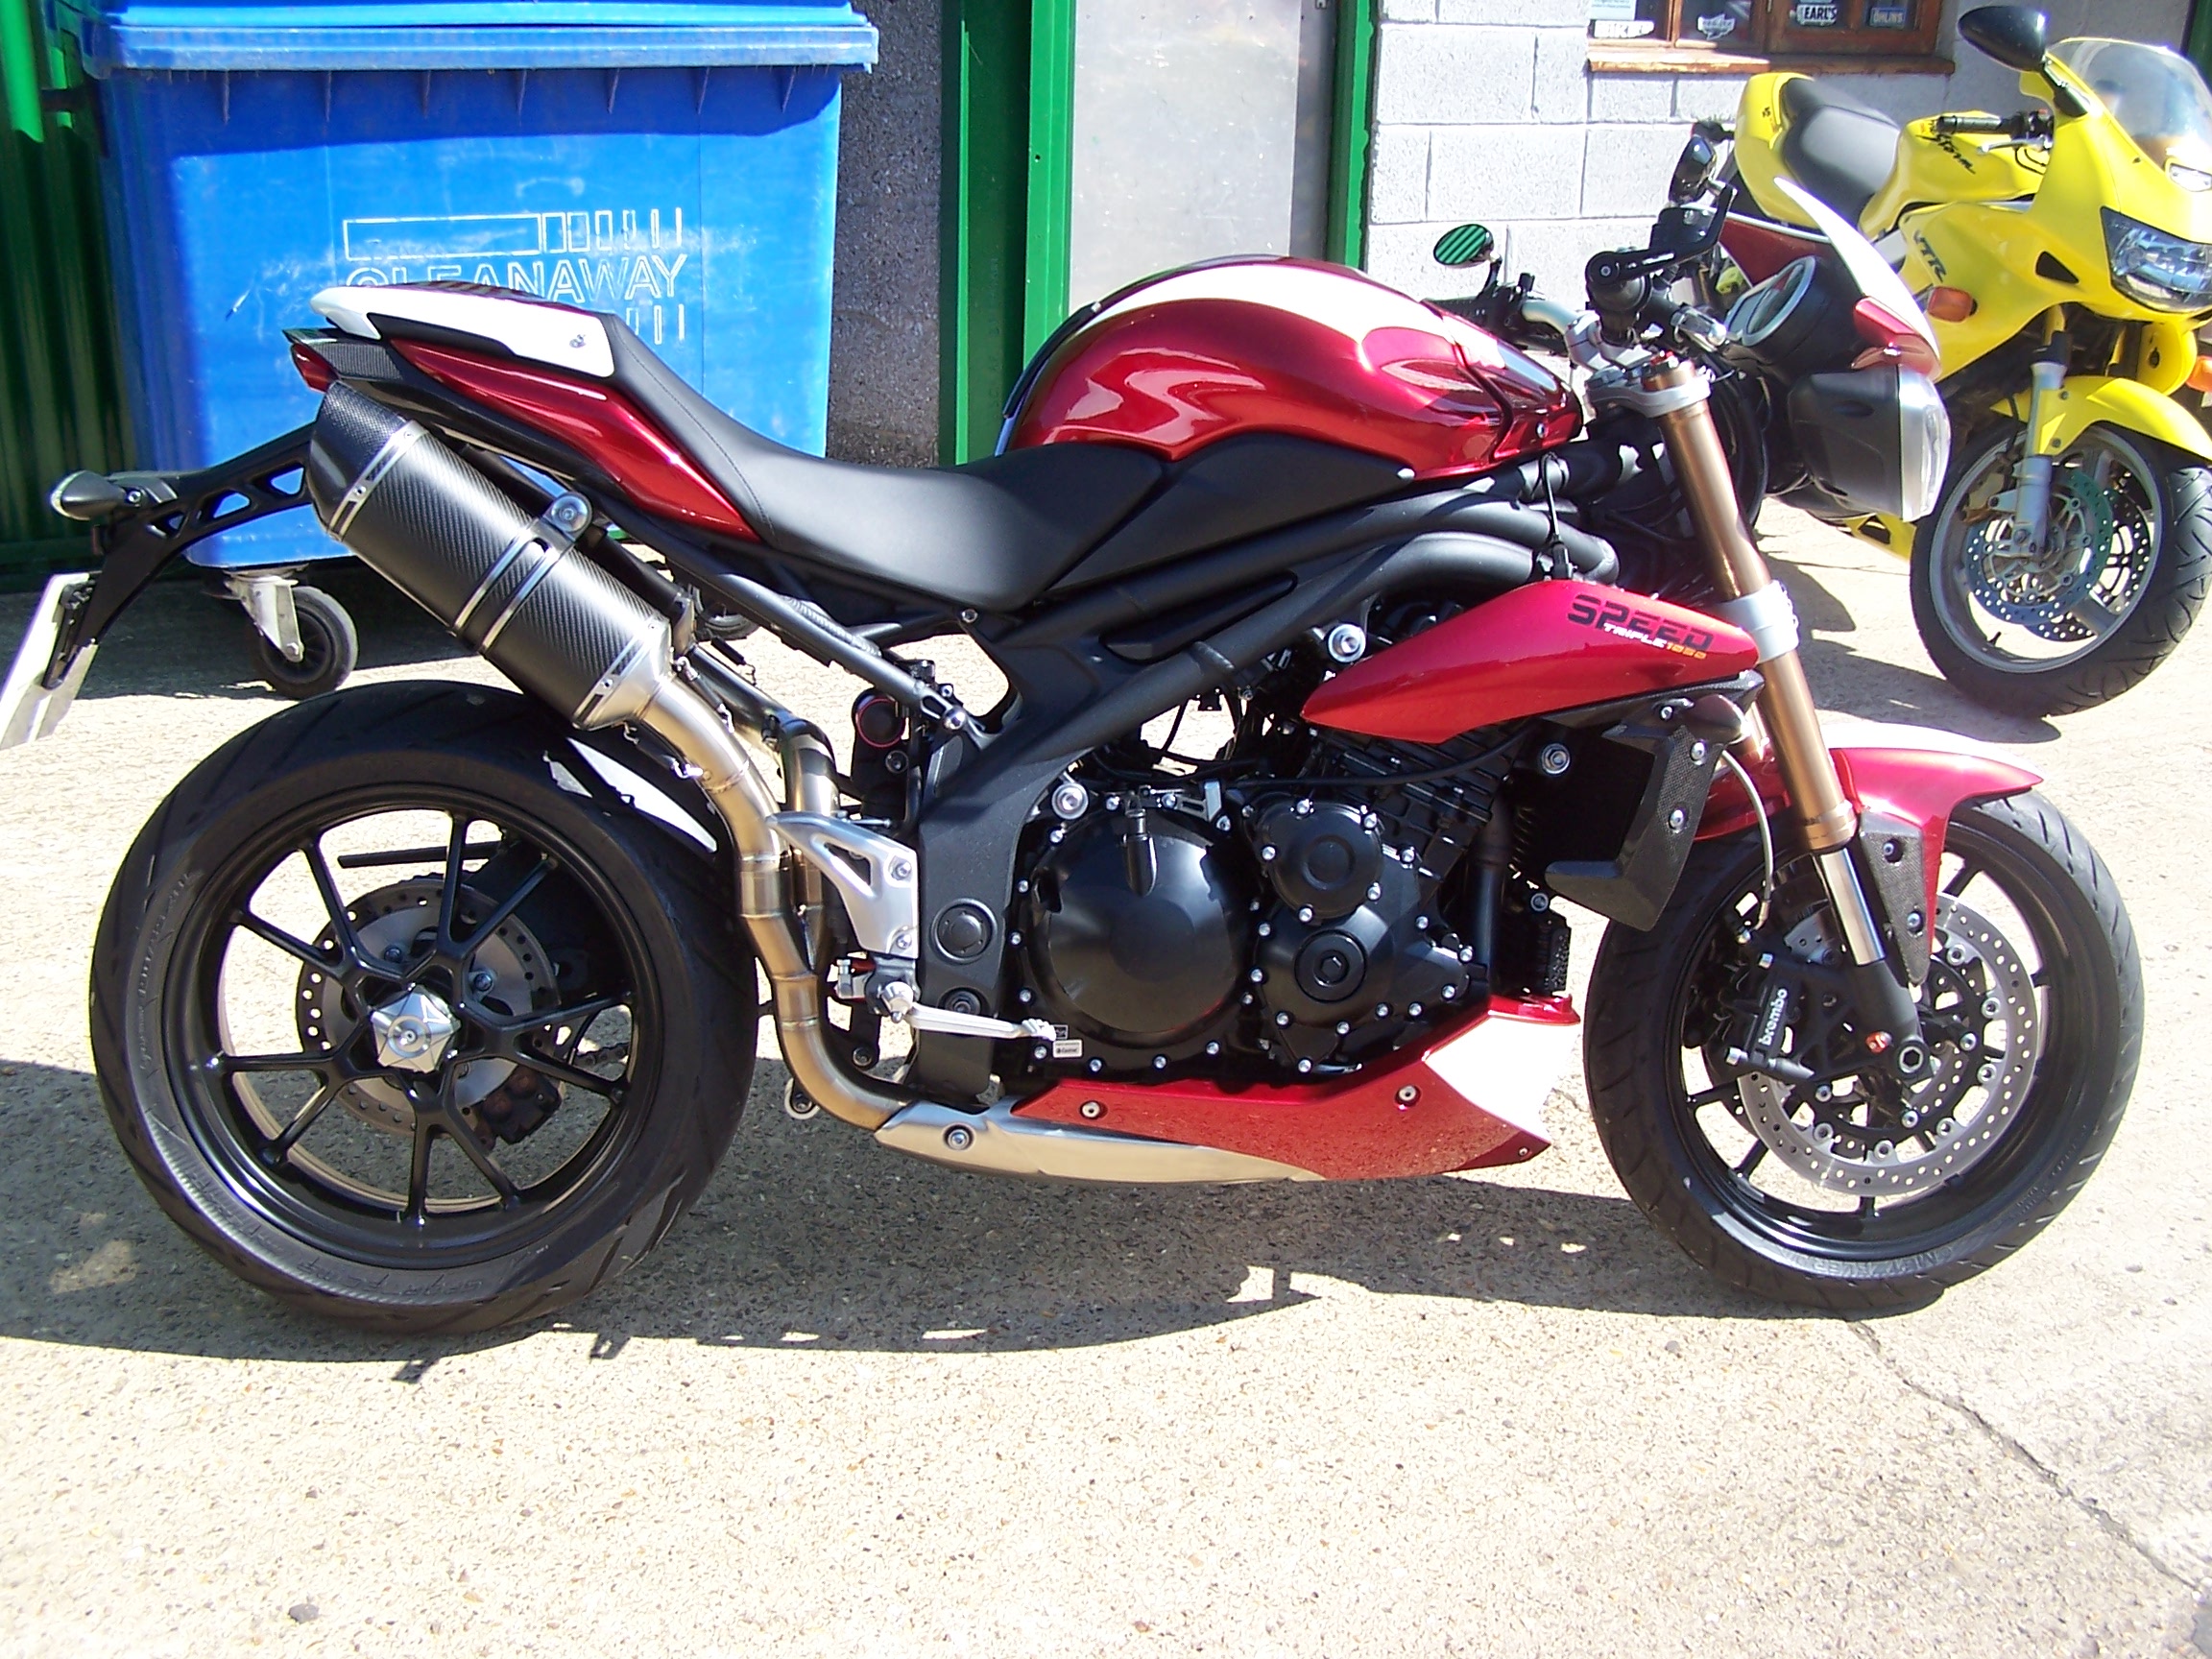 Triumph Speed Triple ECU remap – an owner emails his thoughts…